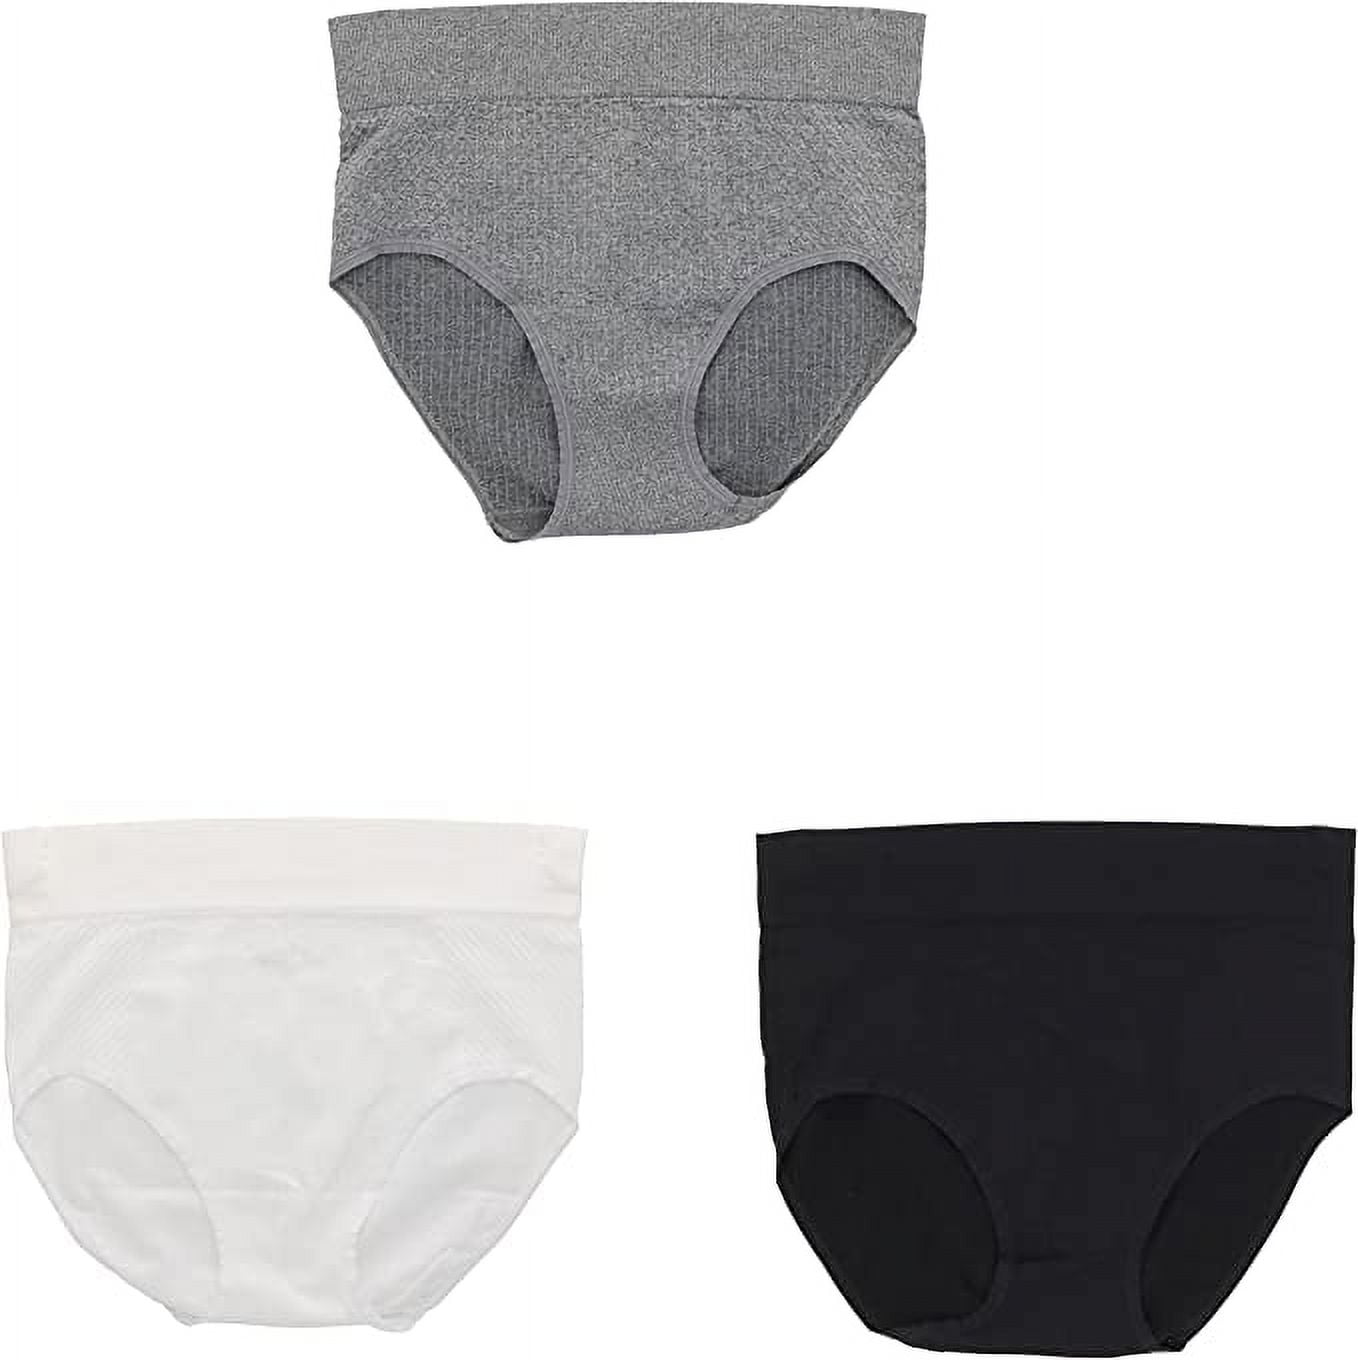 Delta Burke Intimates Women's Plus Size Ribbed Hi-Rise Brief Panties - 3  Pack - Black, White, & Charcoal - 2X-Large 